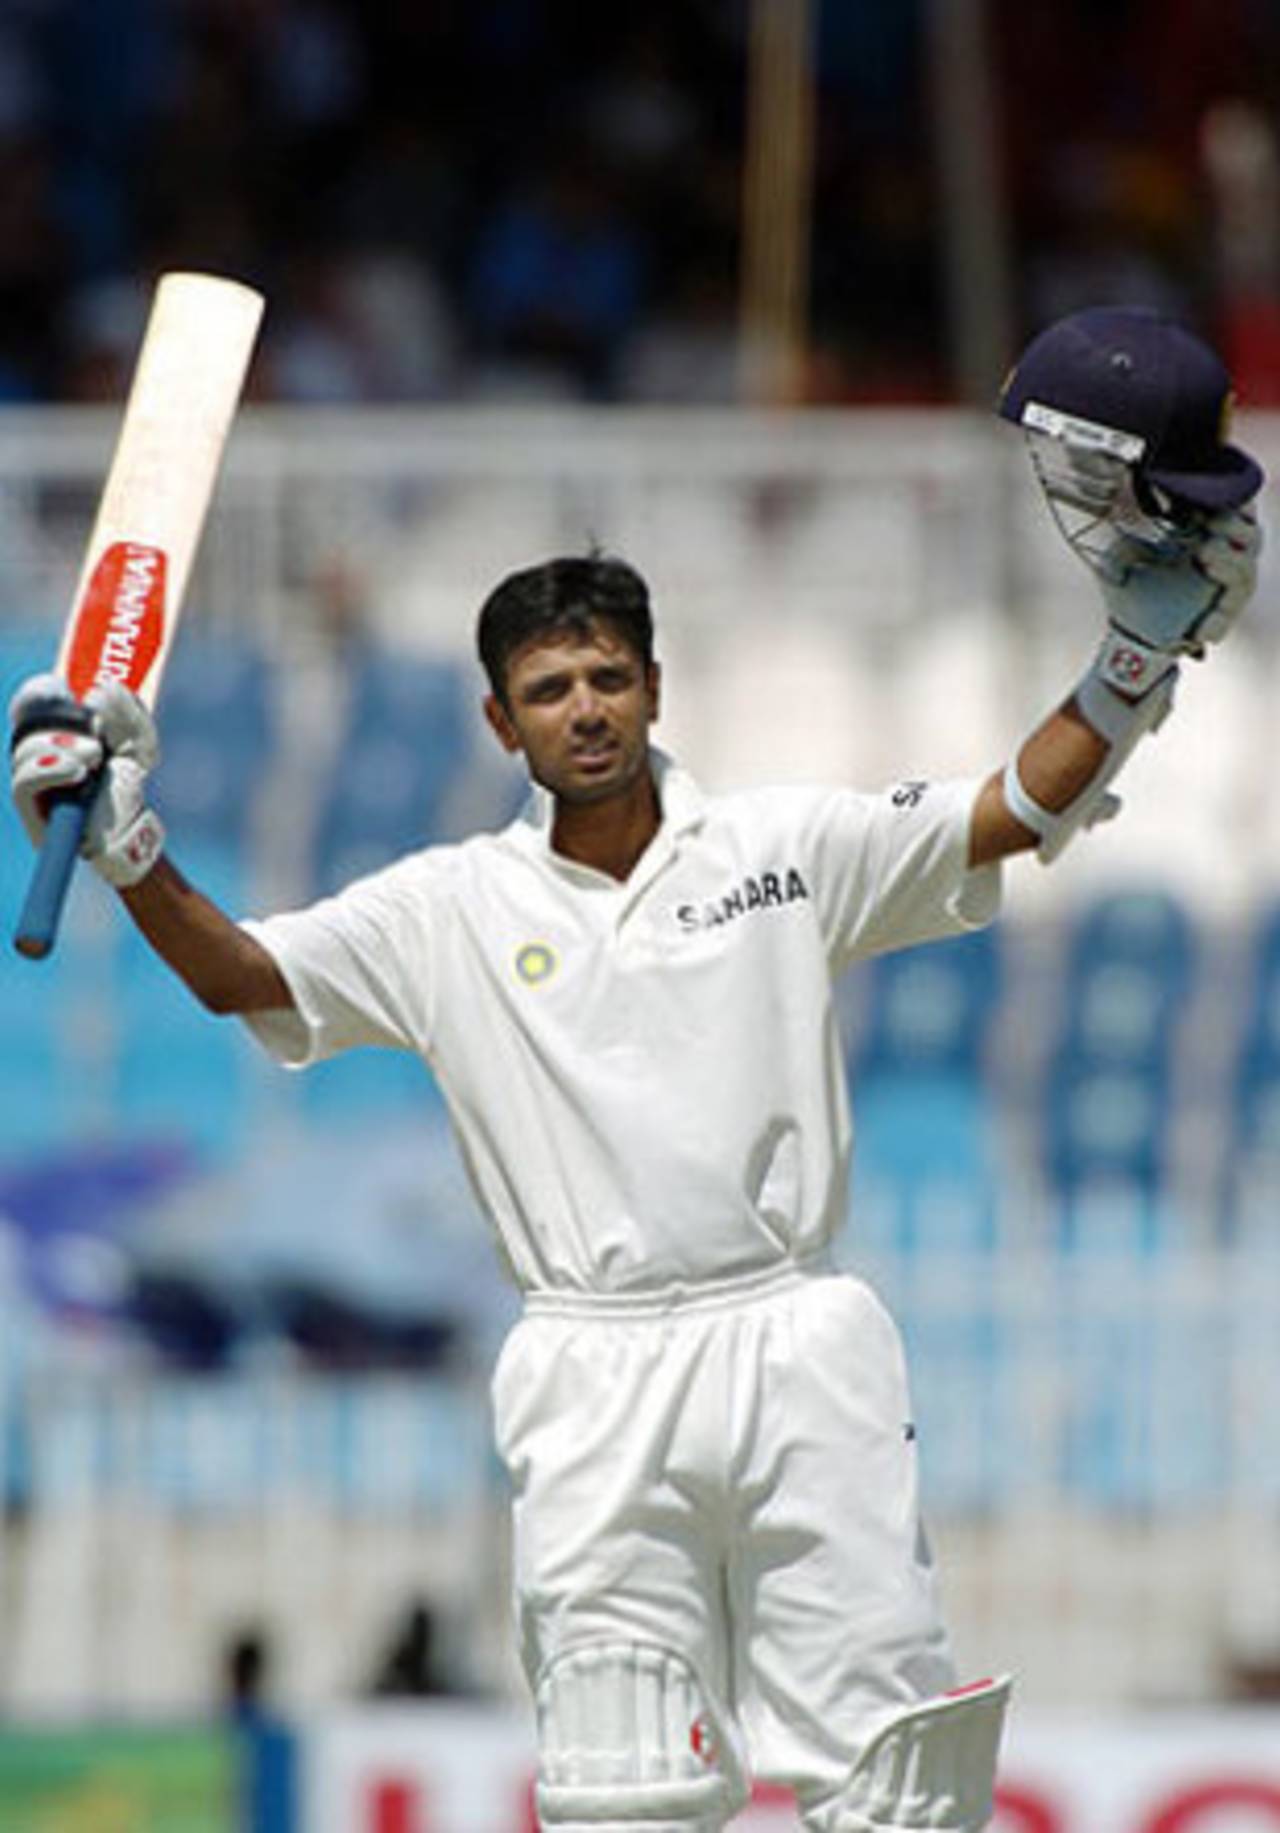 There's more to Rahul Dravid than just cricket&nbsp;&nbsp;&bull;&nbsp;&nbsp;Jewel Samad/AFP